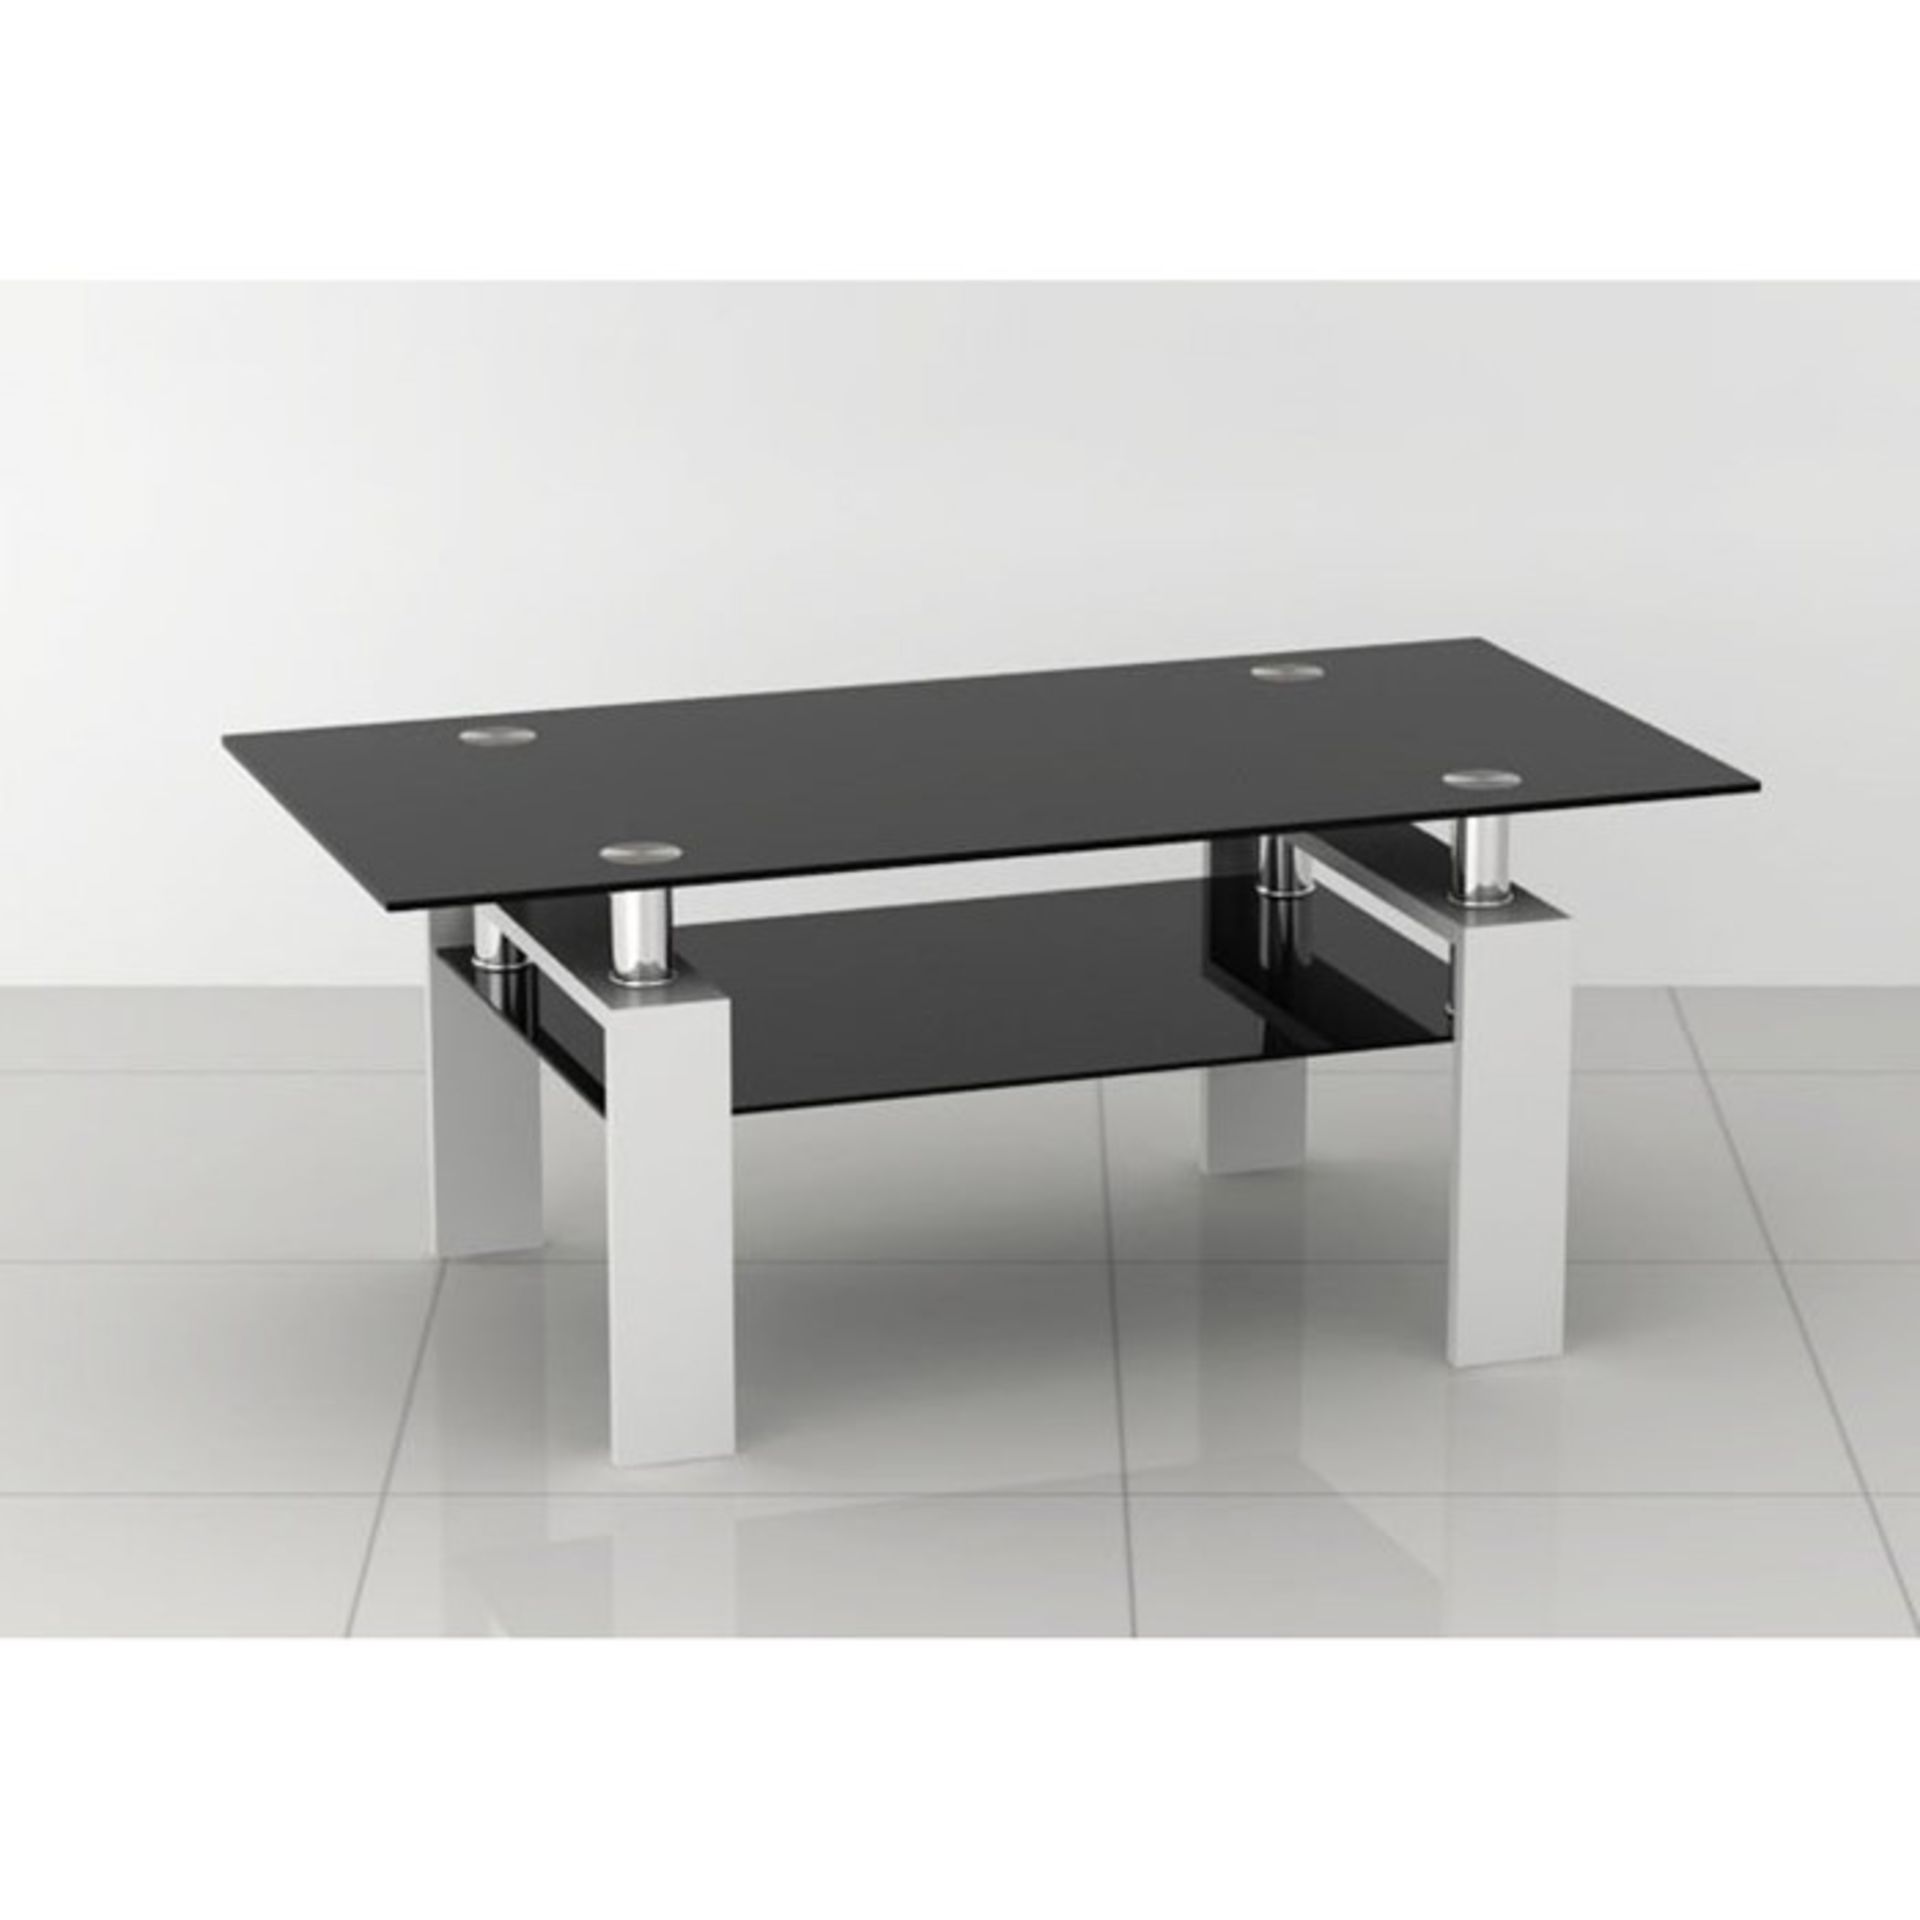 1 AS NEW BOXED 2 TIER COFFEE TABLE IN BLACK GLASS AND A WHITE BASE / CTB419BLKWHT (VIEWING HIGHLY